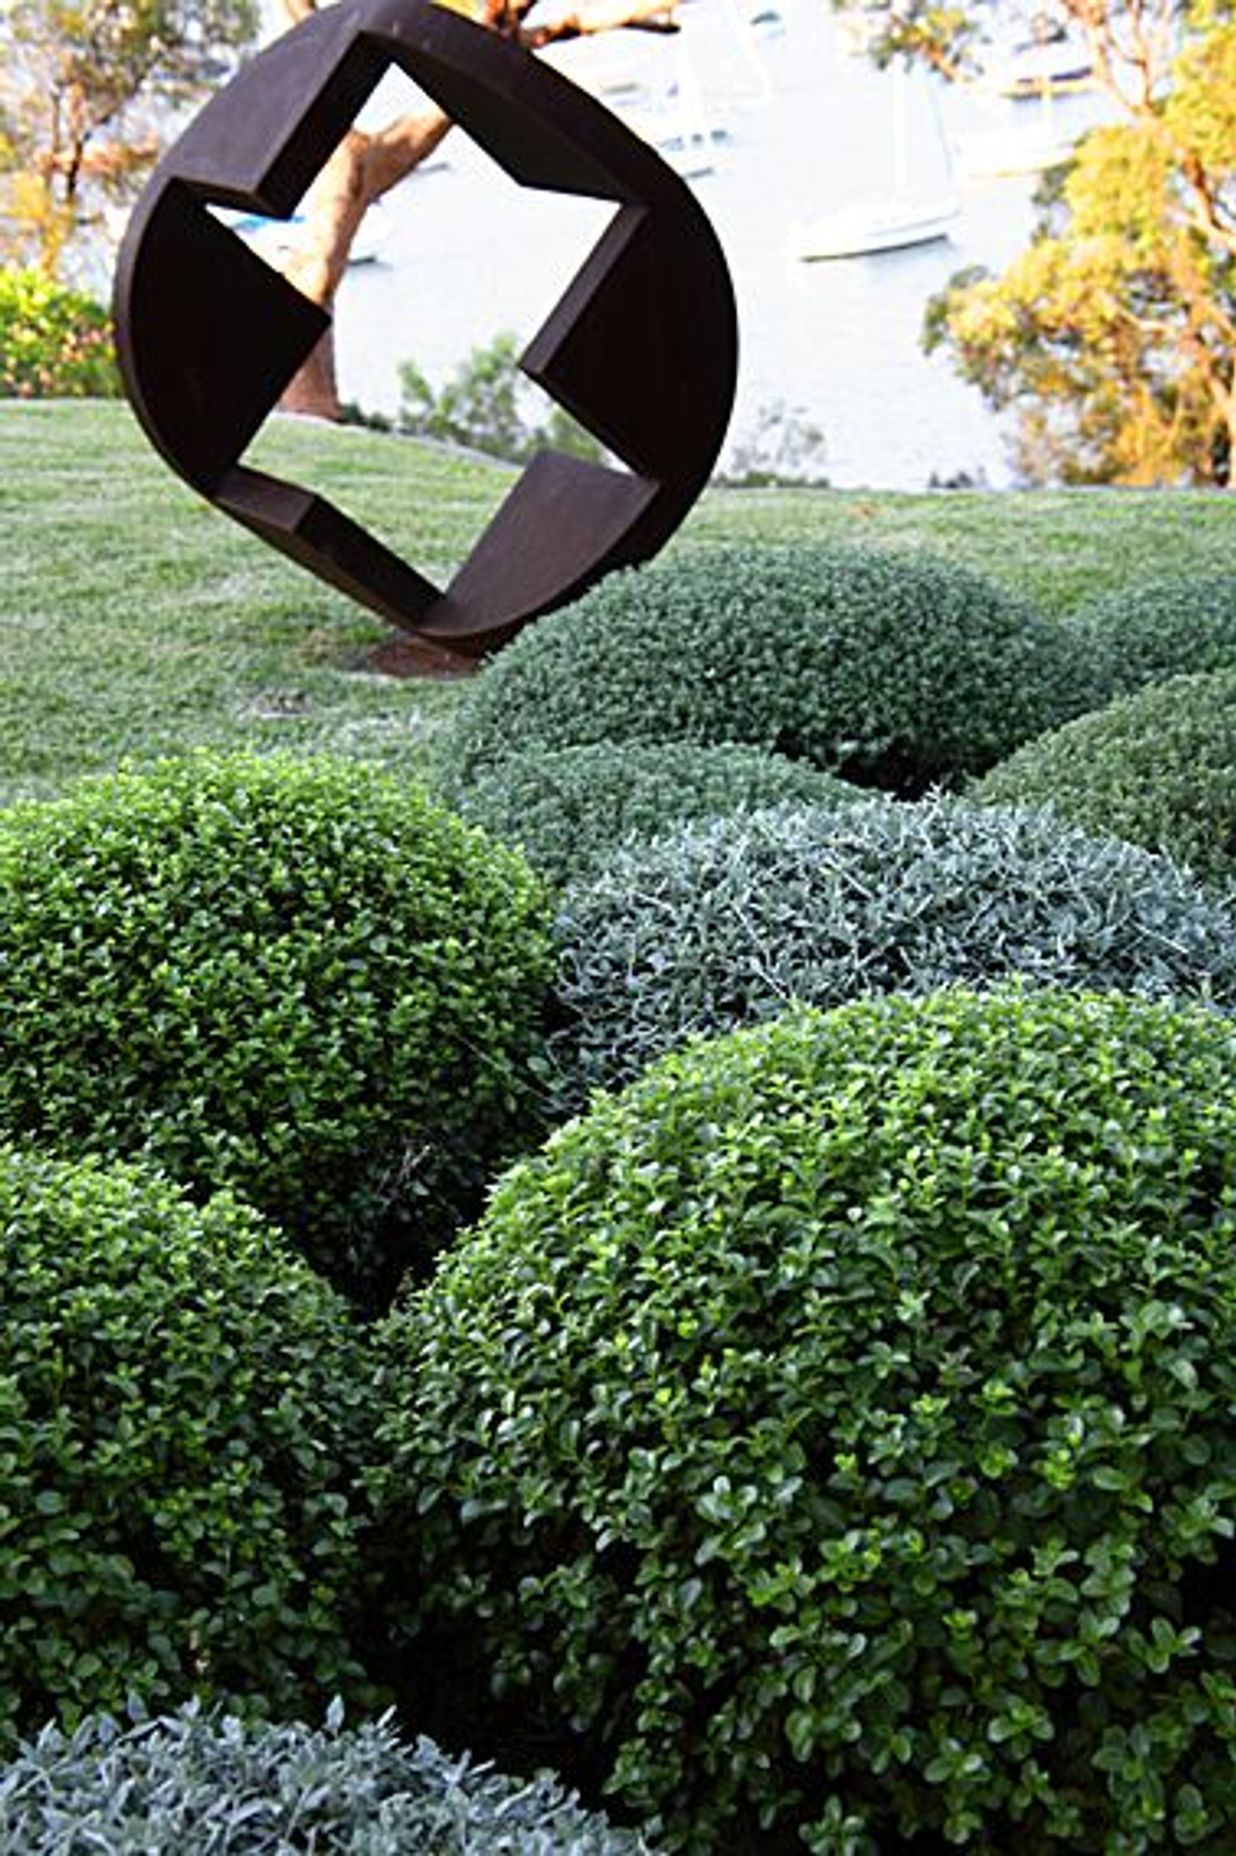 The shape of things to come: Introducing sculpture to the garden